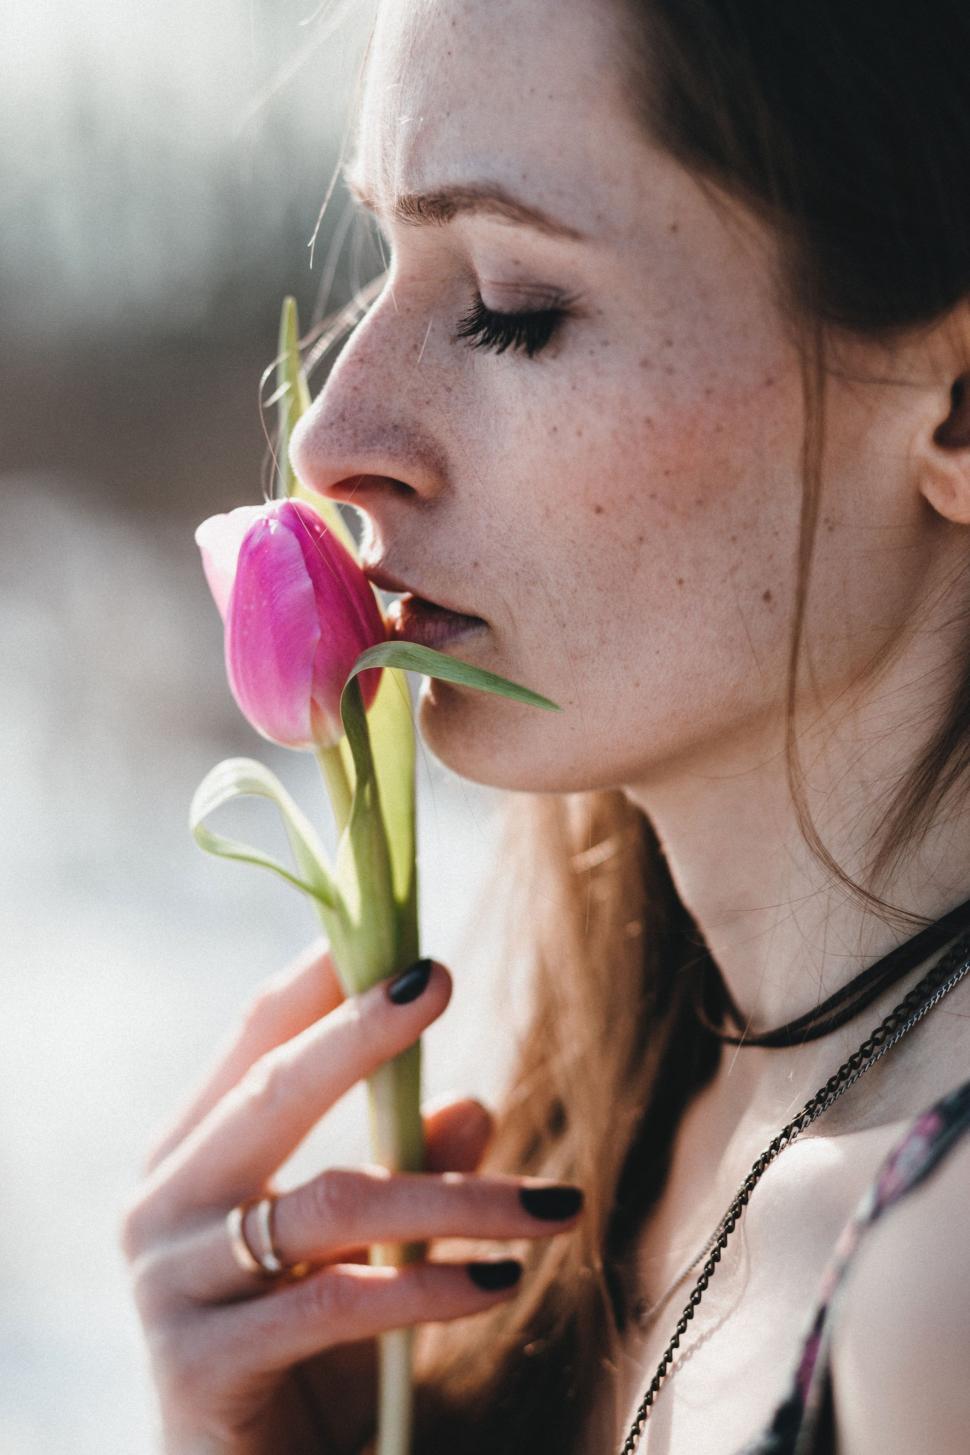 Free Image of Woman Holding a Flower in Her Hand 